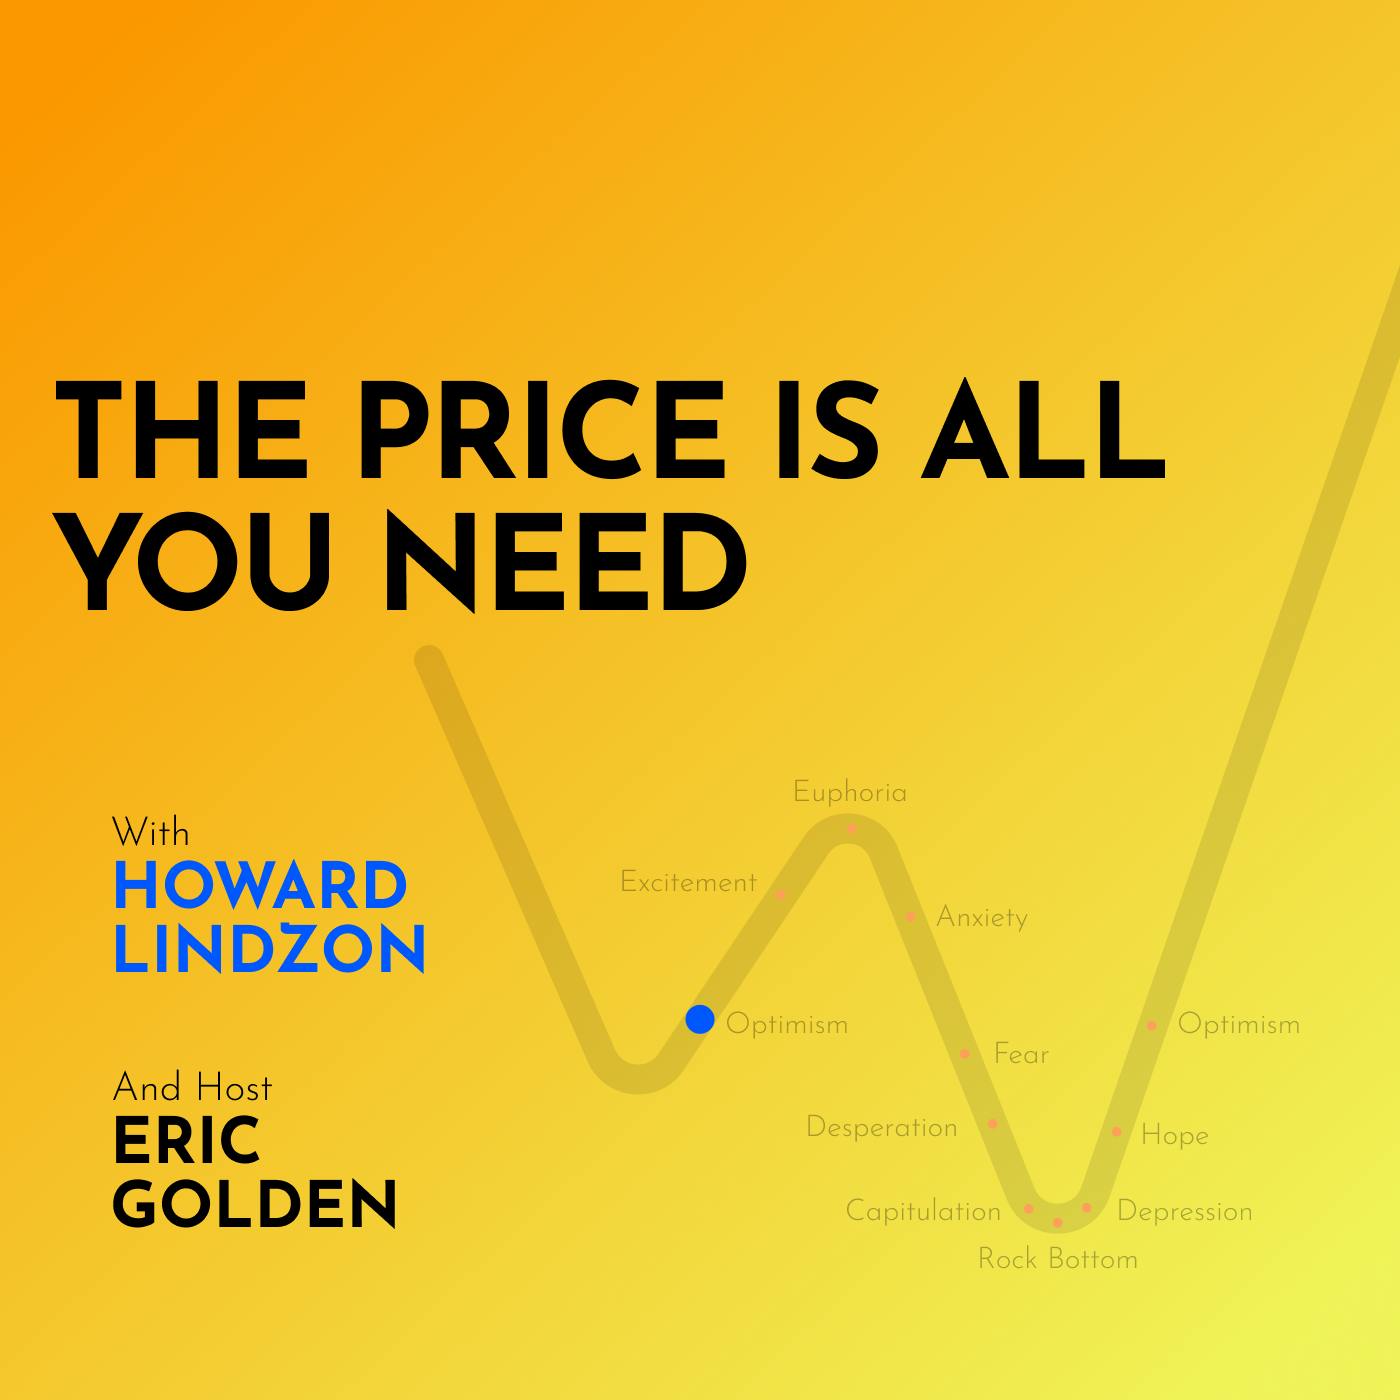 Howard Lindzon: The Price is All you Need - [Making Markets, EP.12]